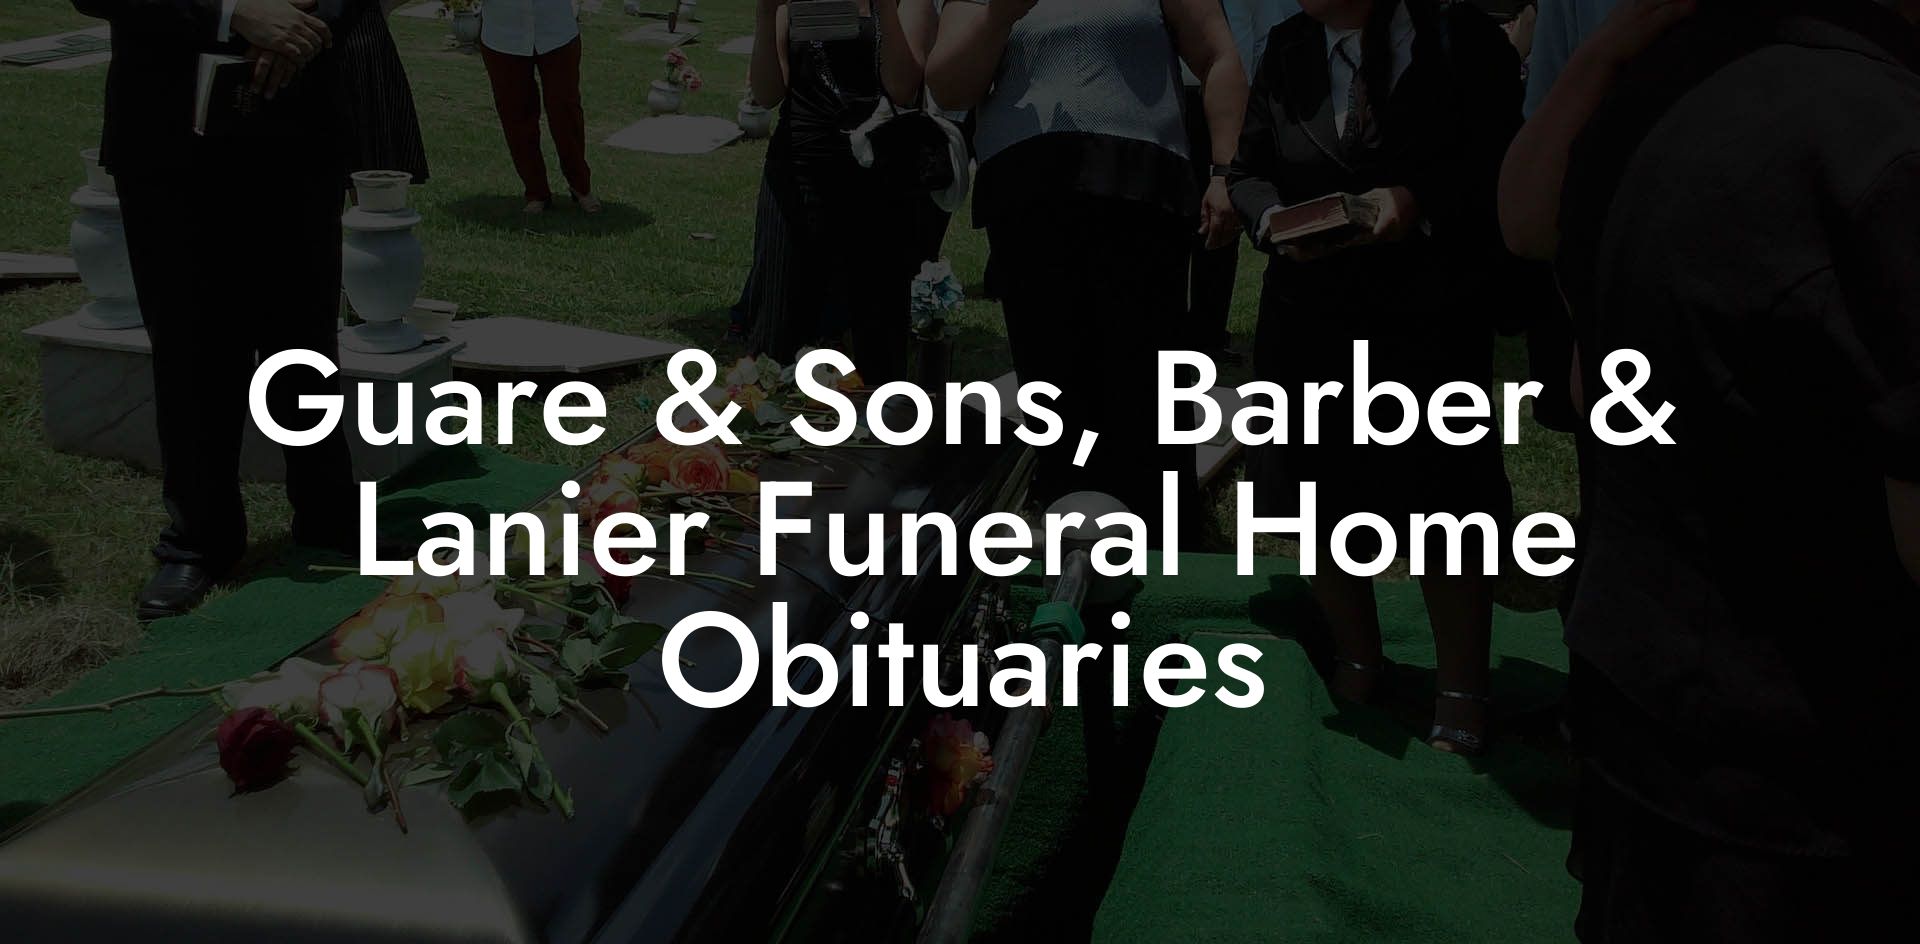 Guare & Sons, Barber & Lanier Funeral Home Obituaries